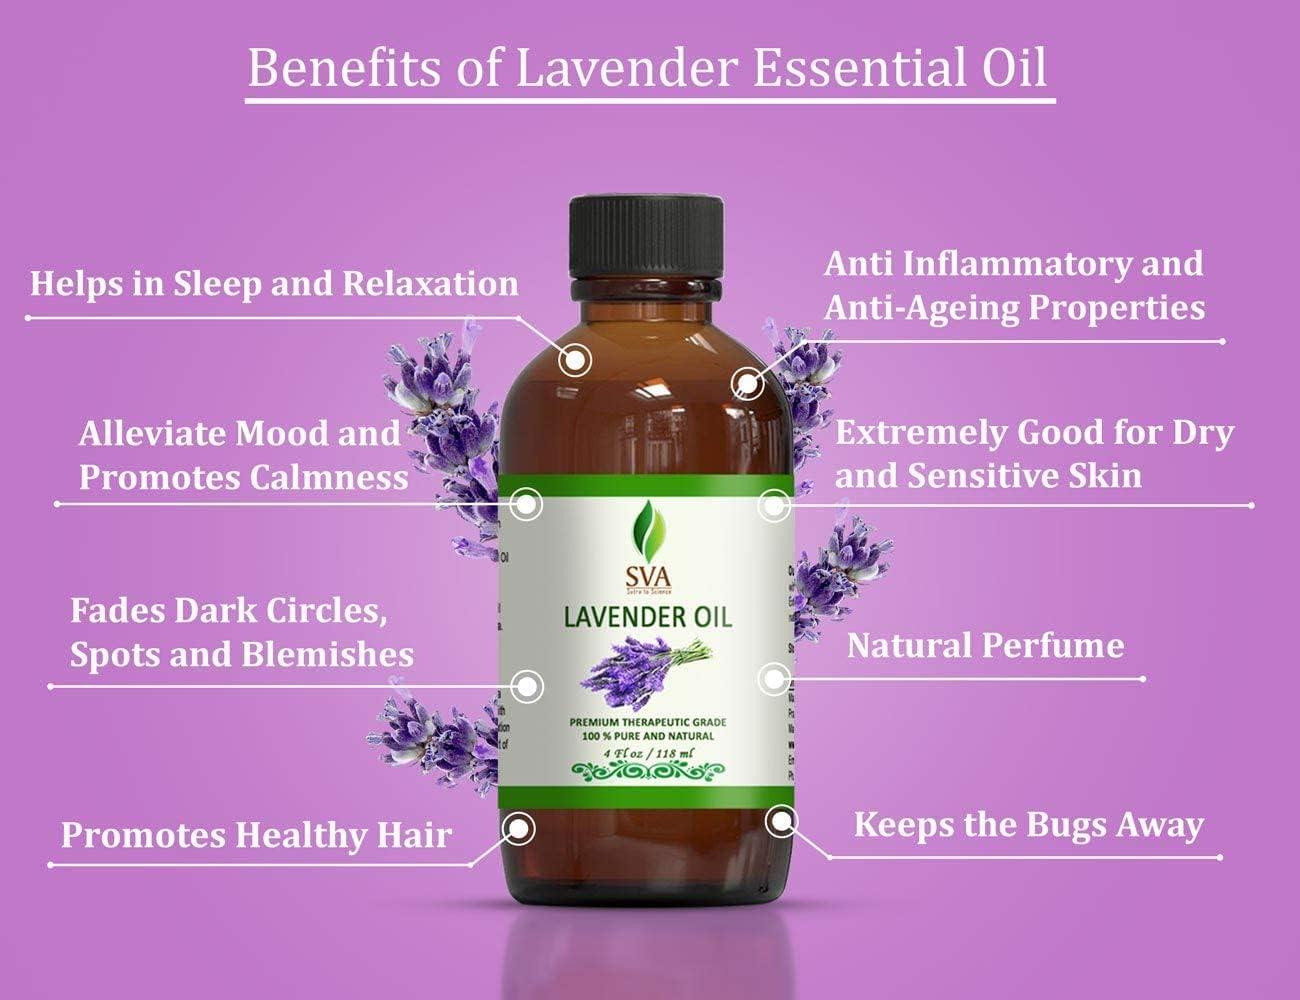  Lavender Essential Oil Pure Lavender Oil Organic Essential Oils  Lavender Oil Essential Oil Essential Oils for Body Face Skin Care Massage  Aroma Lavender Oil for Hair Growth Diffuser Aromatherapy 4FLOZ 